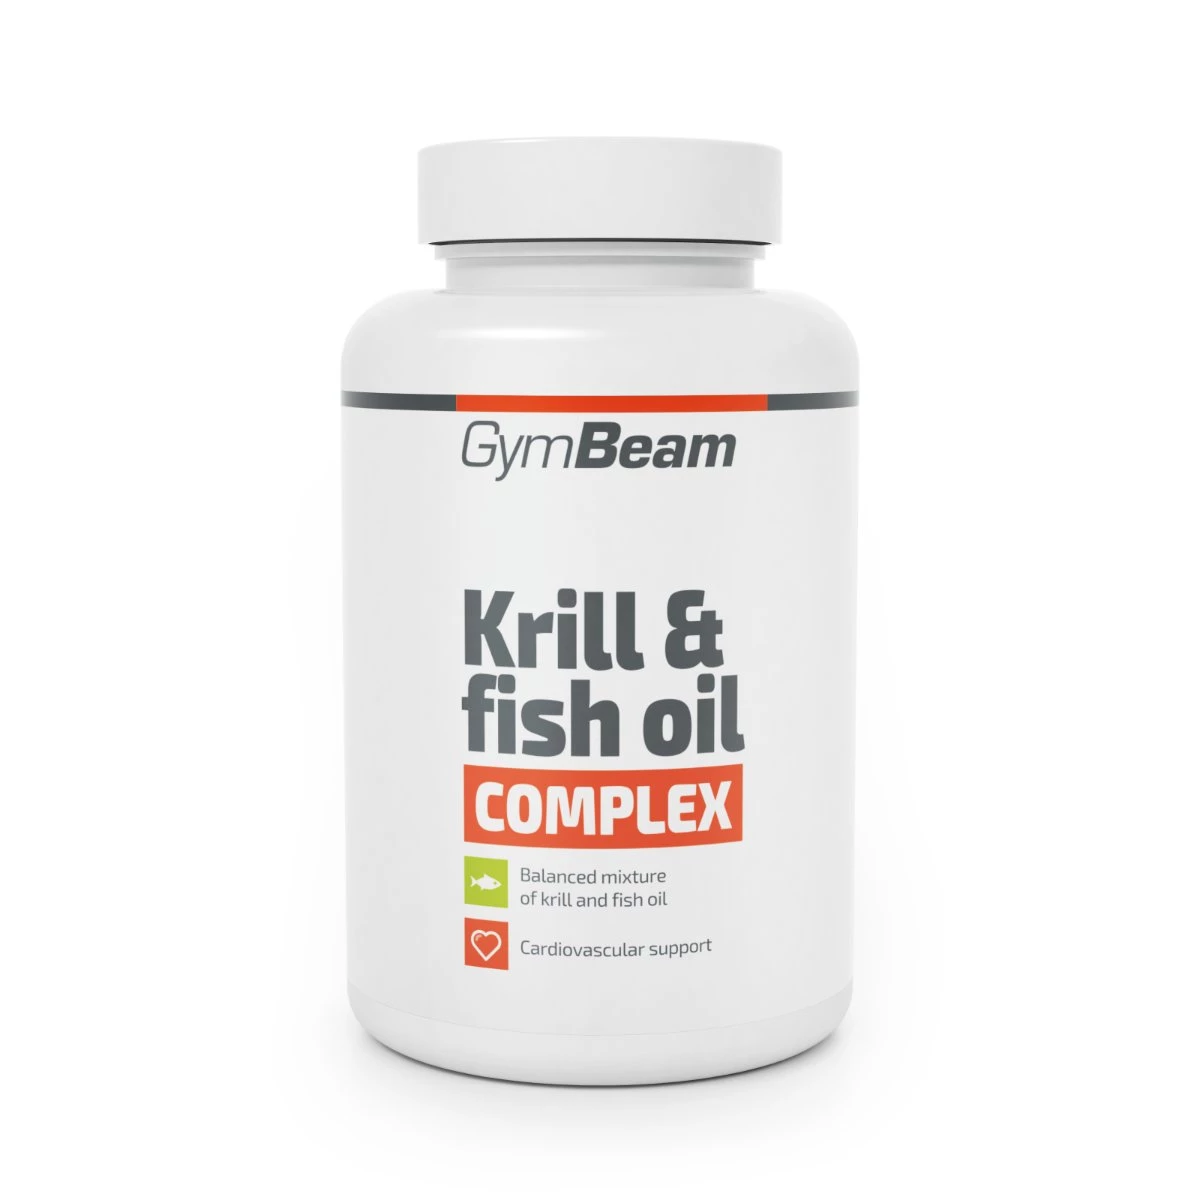 Krill and Fish Oil Complex - GymBeam 90 kaps.